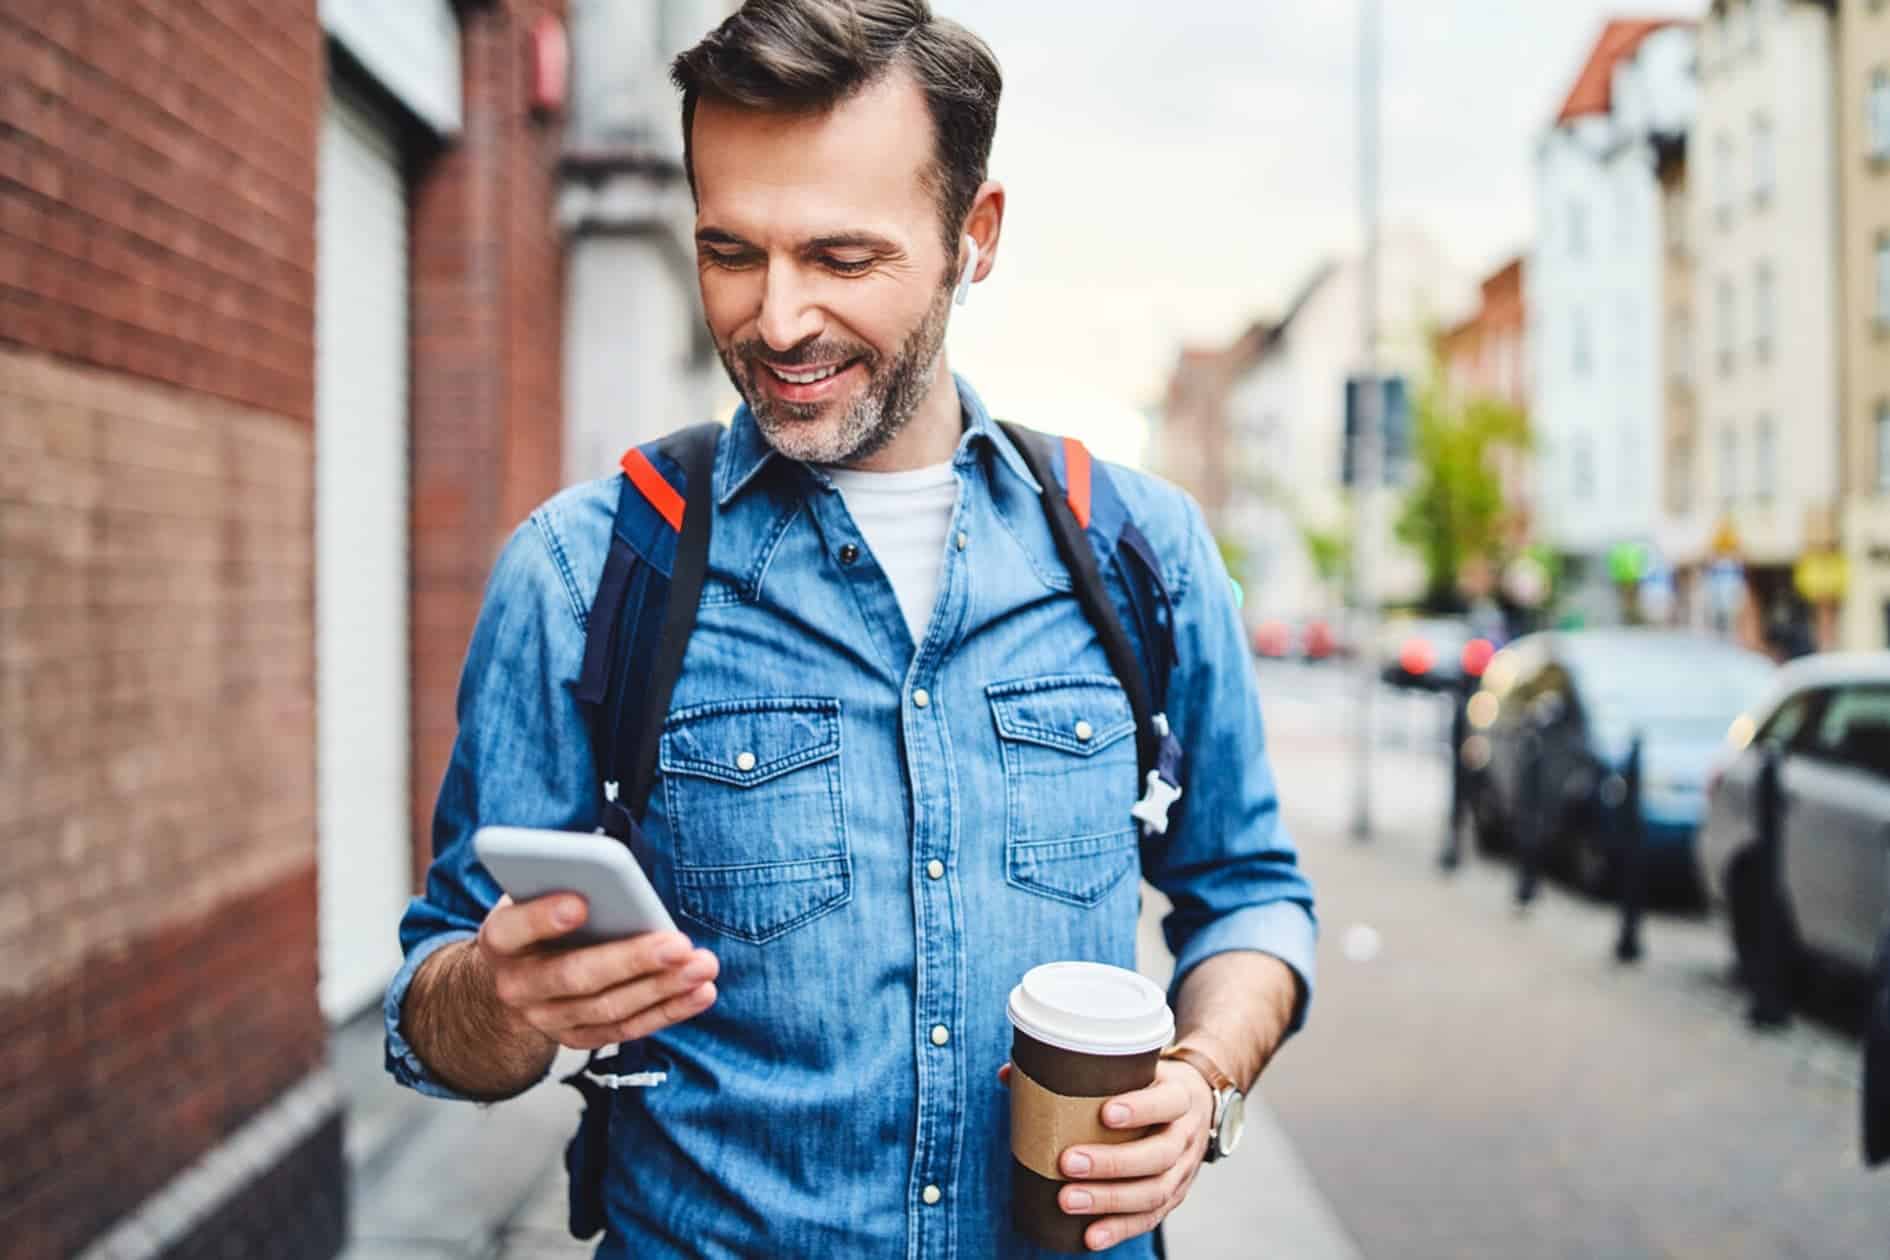 A man in a denim jacket walking down a street. He is holding a takeaway coffee in one hand while looking at the mobile in the other hand.